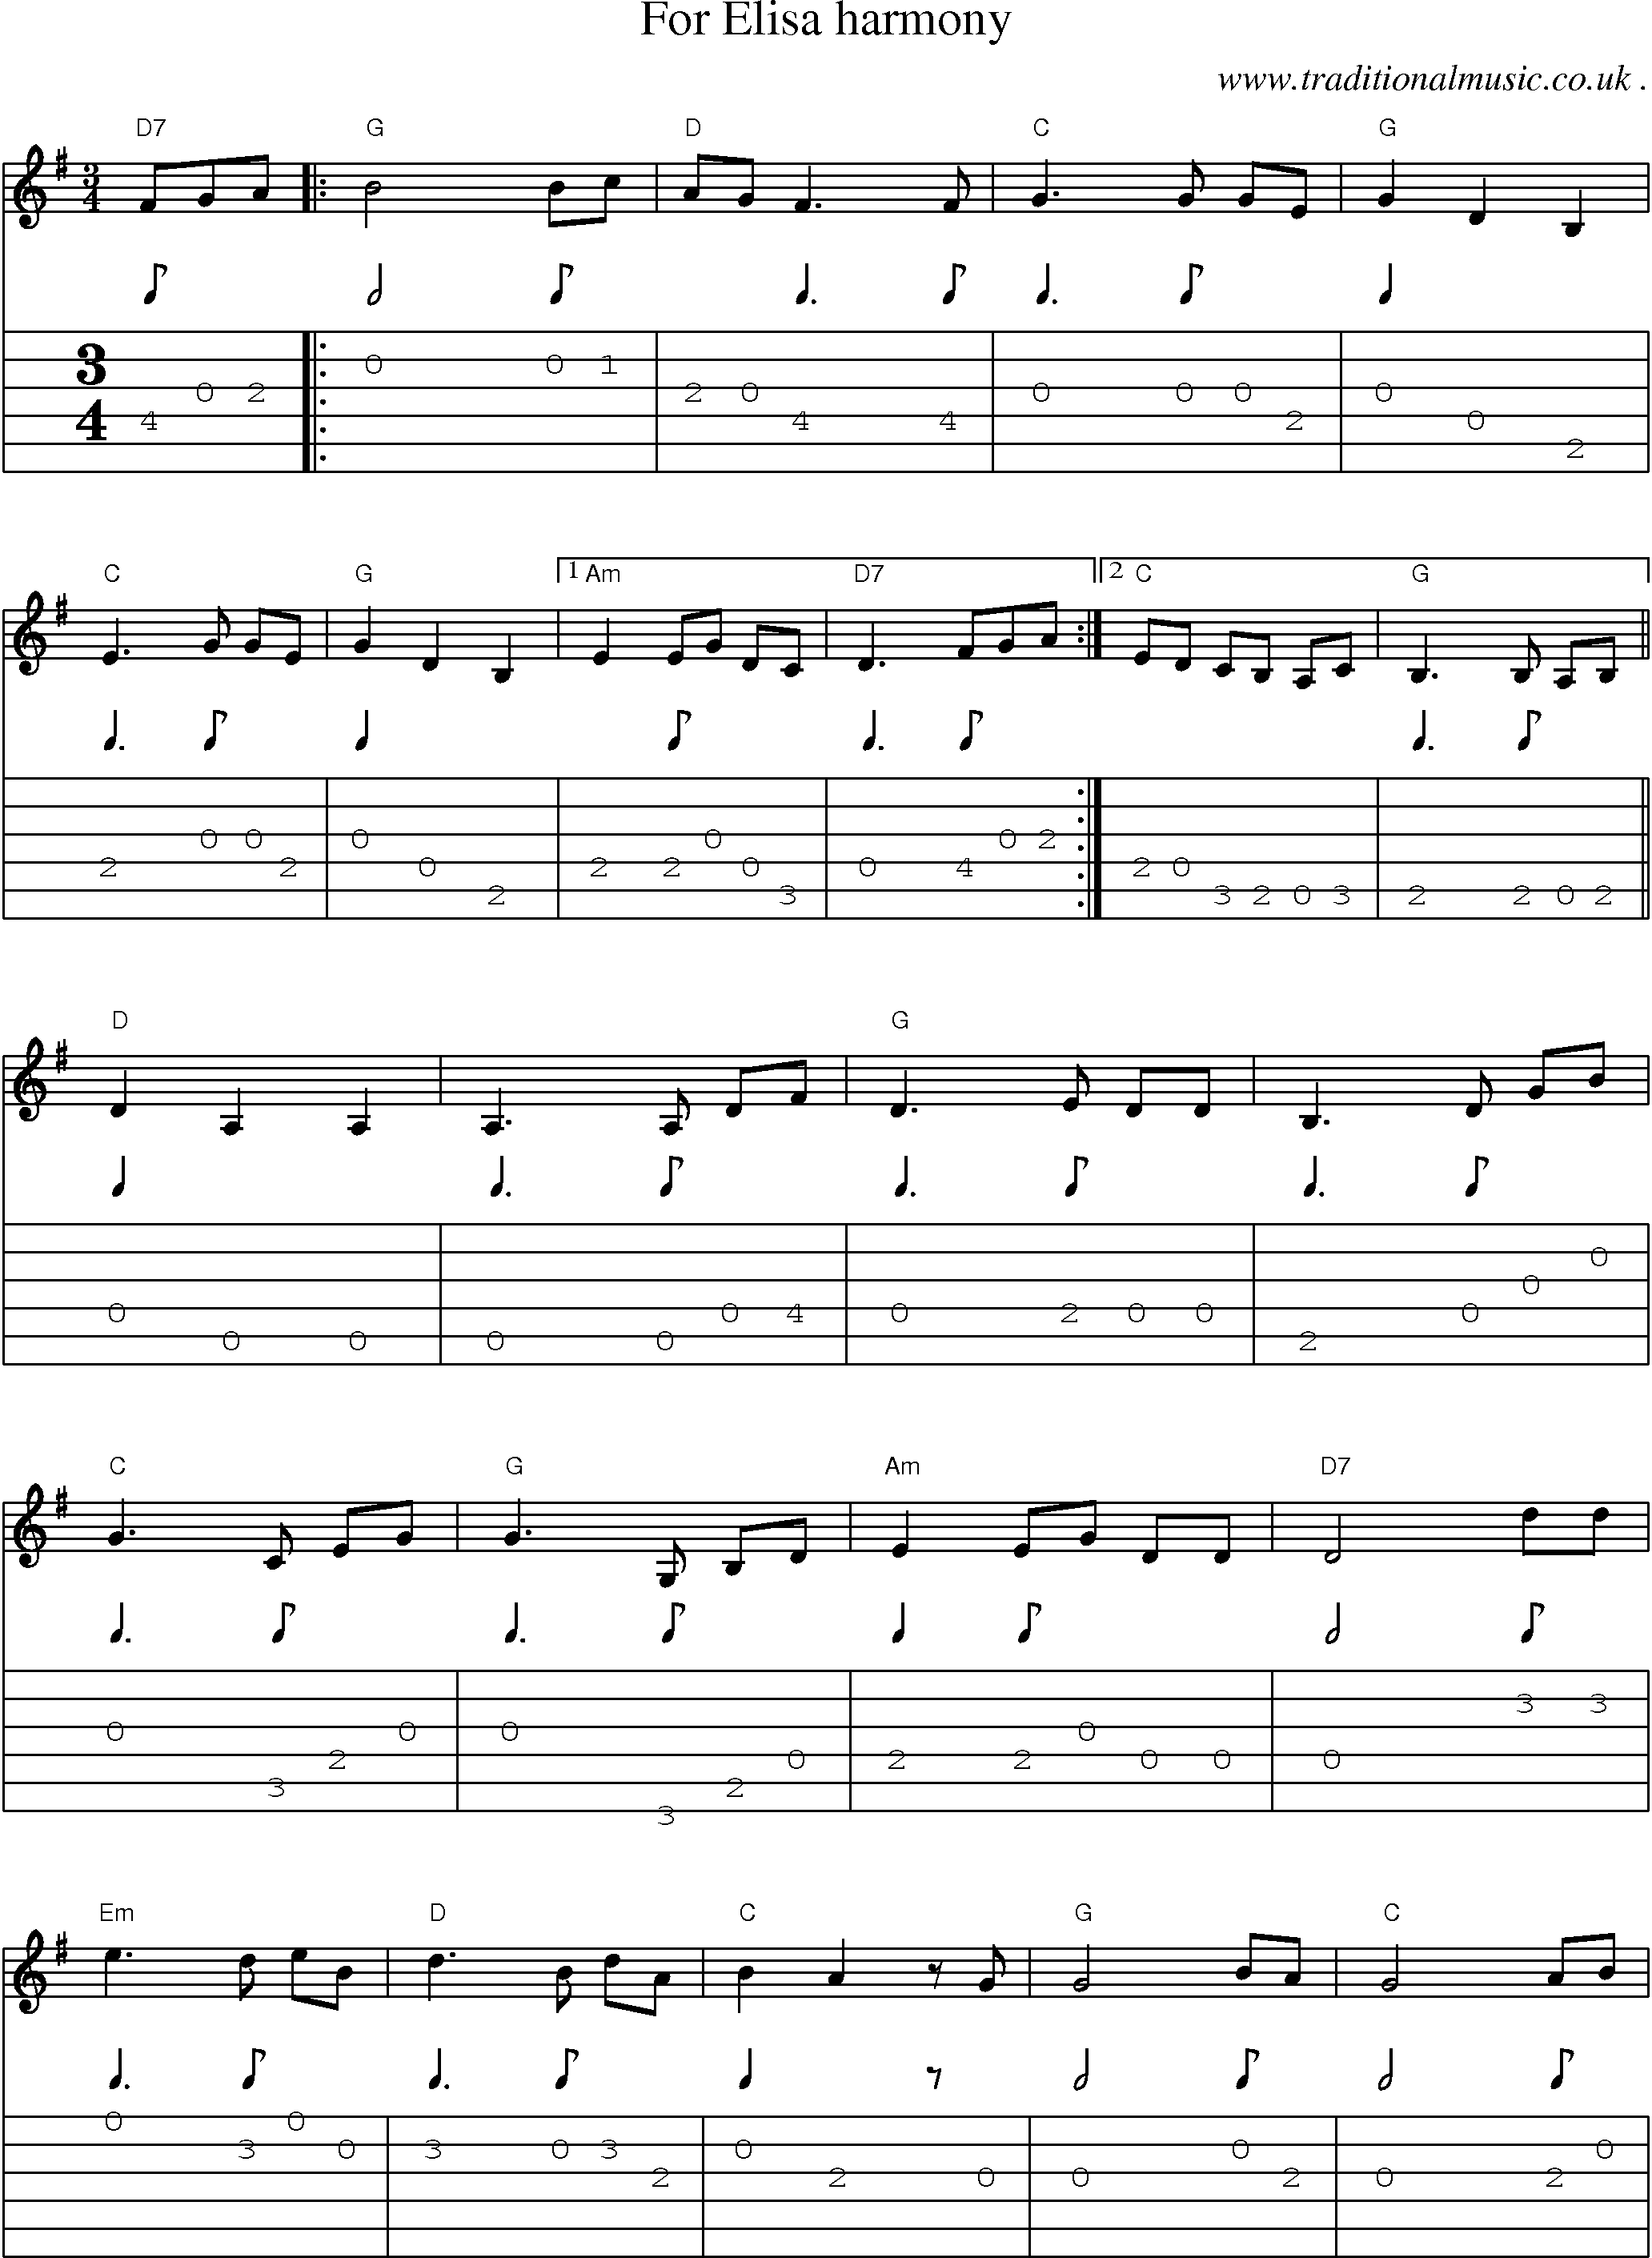 Music Score and Guitar Tabs for For Elisa Harmony